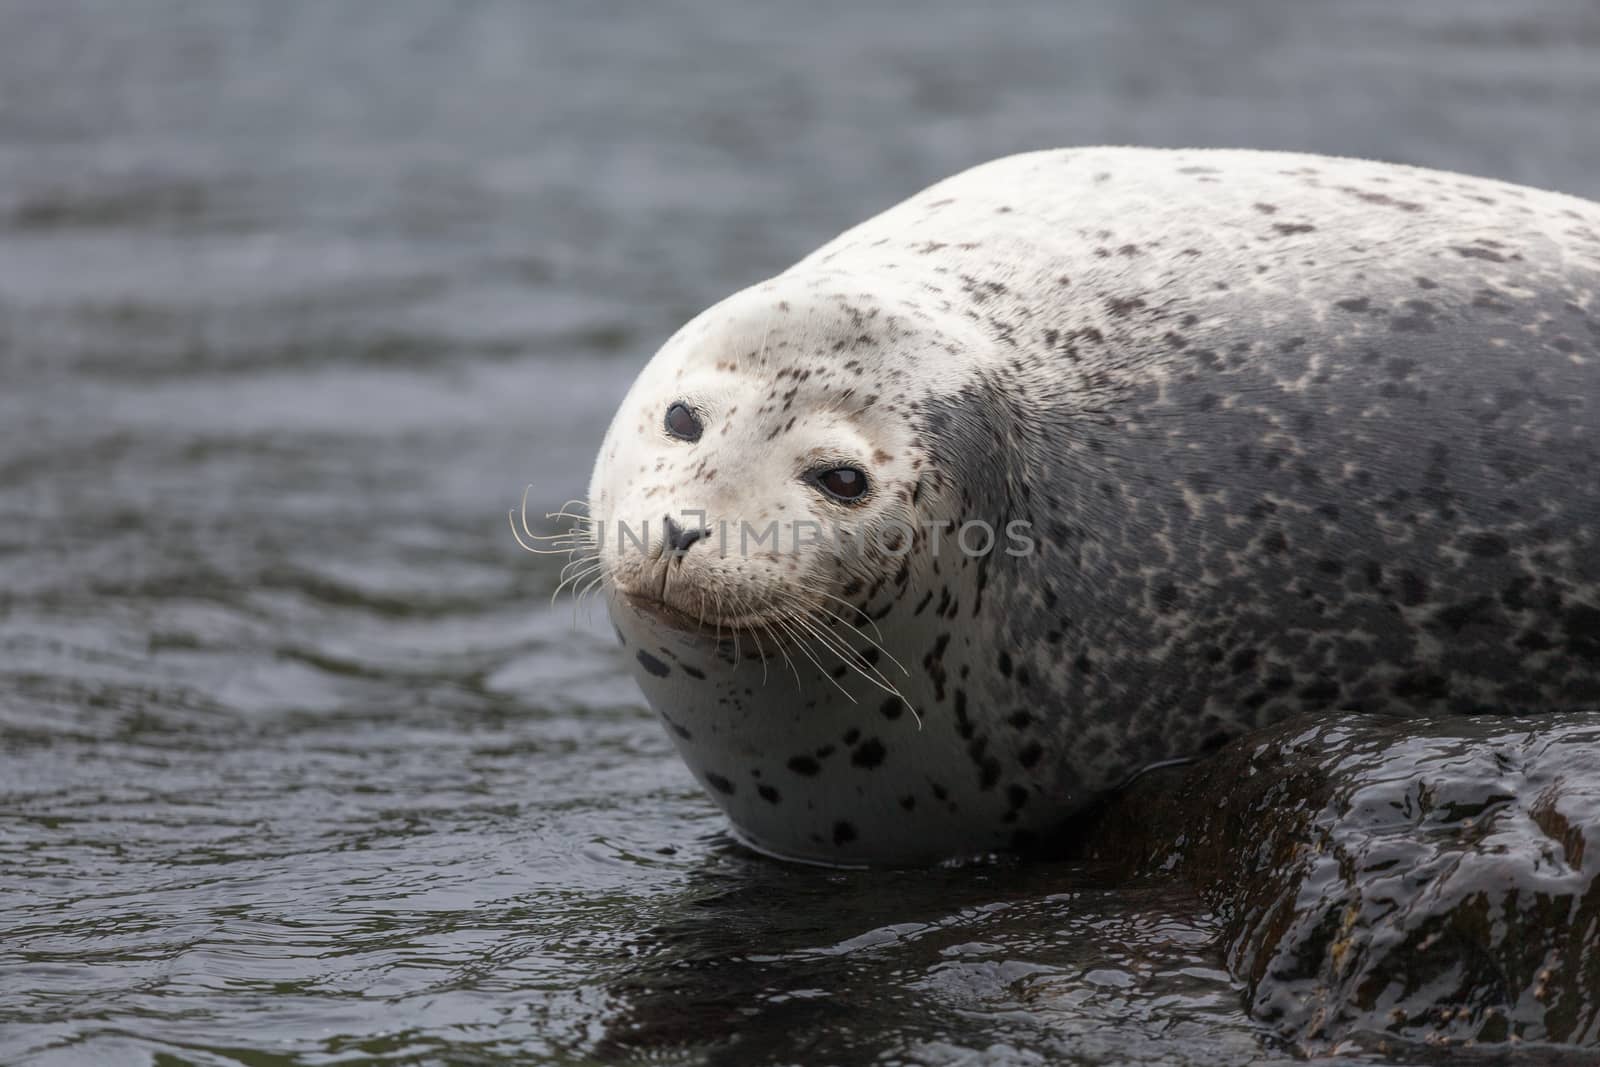 Phoca largha (Larga Seal, Spotted Seal) surface pictures